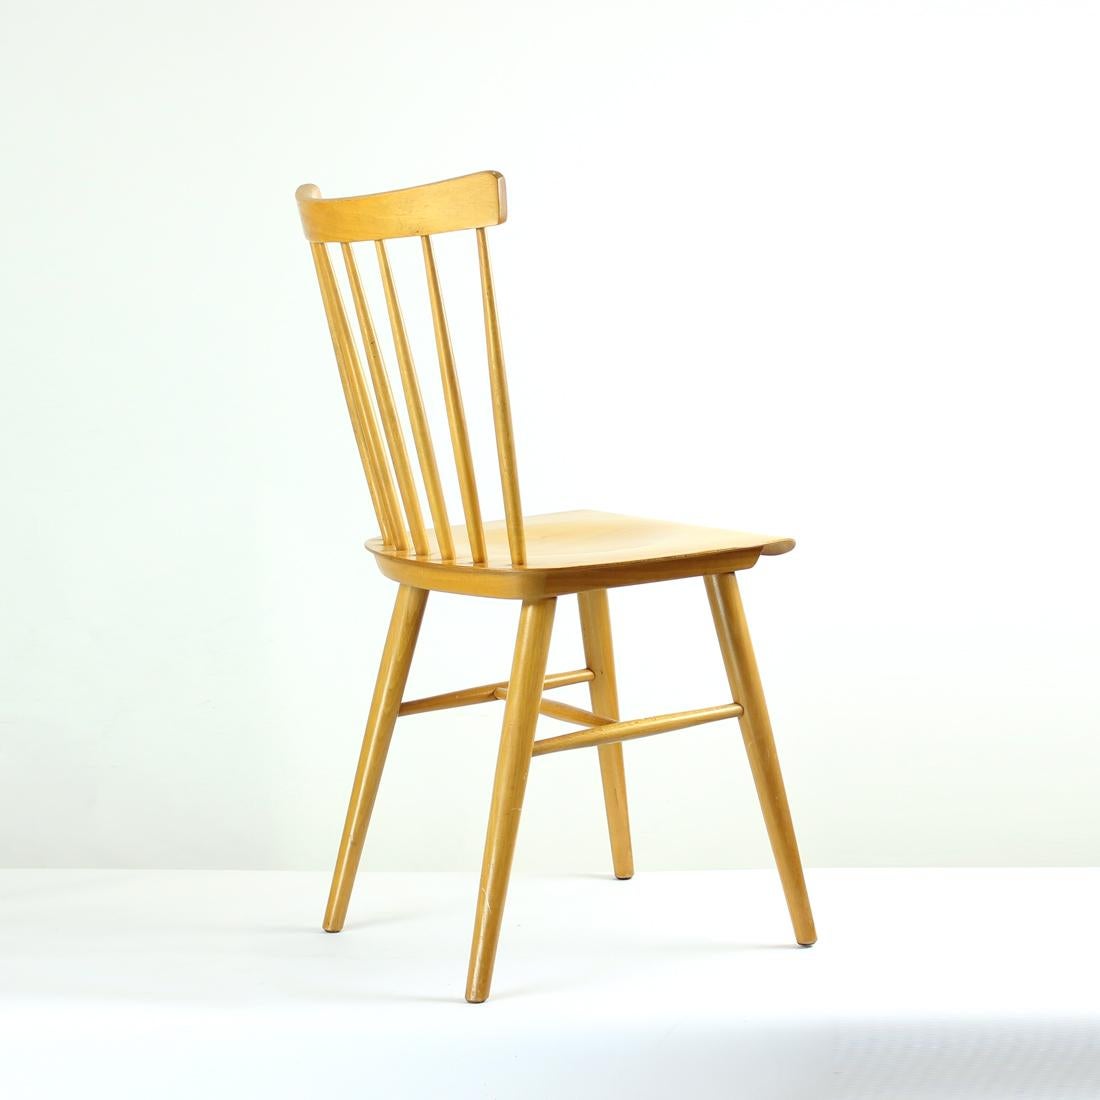 Mid-20th Century Midcentury Ironica Chair by Ton in Oak Wood, Czechoslovakia 1960s For Sale